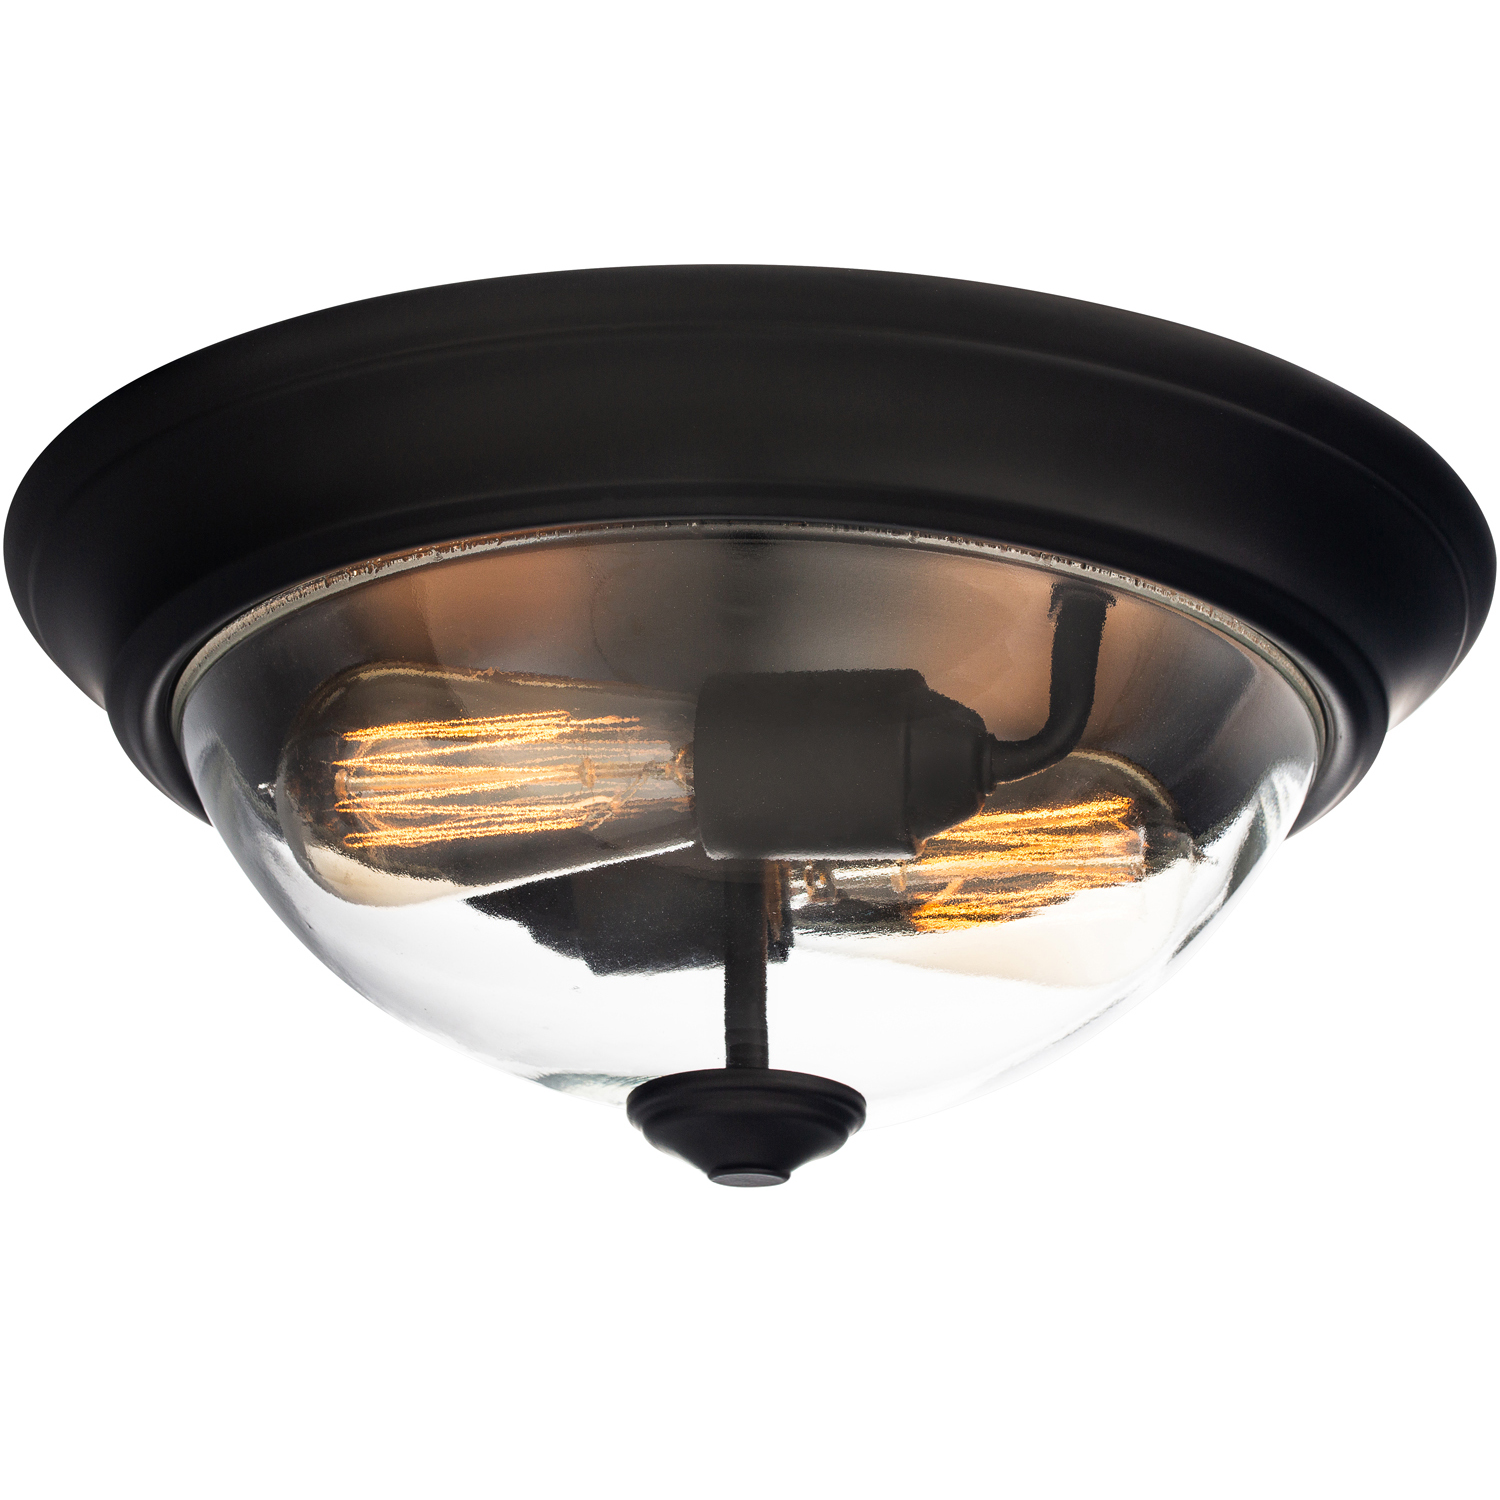 13 Inch Designer Series Flush Mount, Bowl Light, Clear Glass, Bronze by Prominence Home